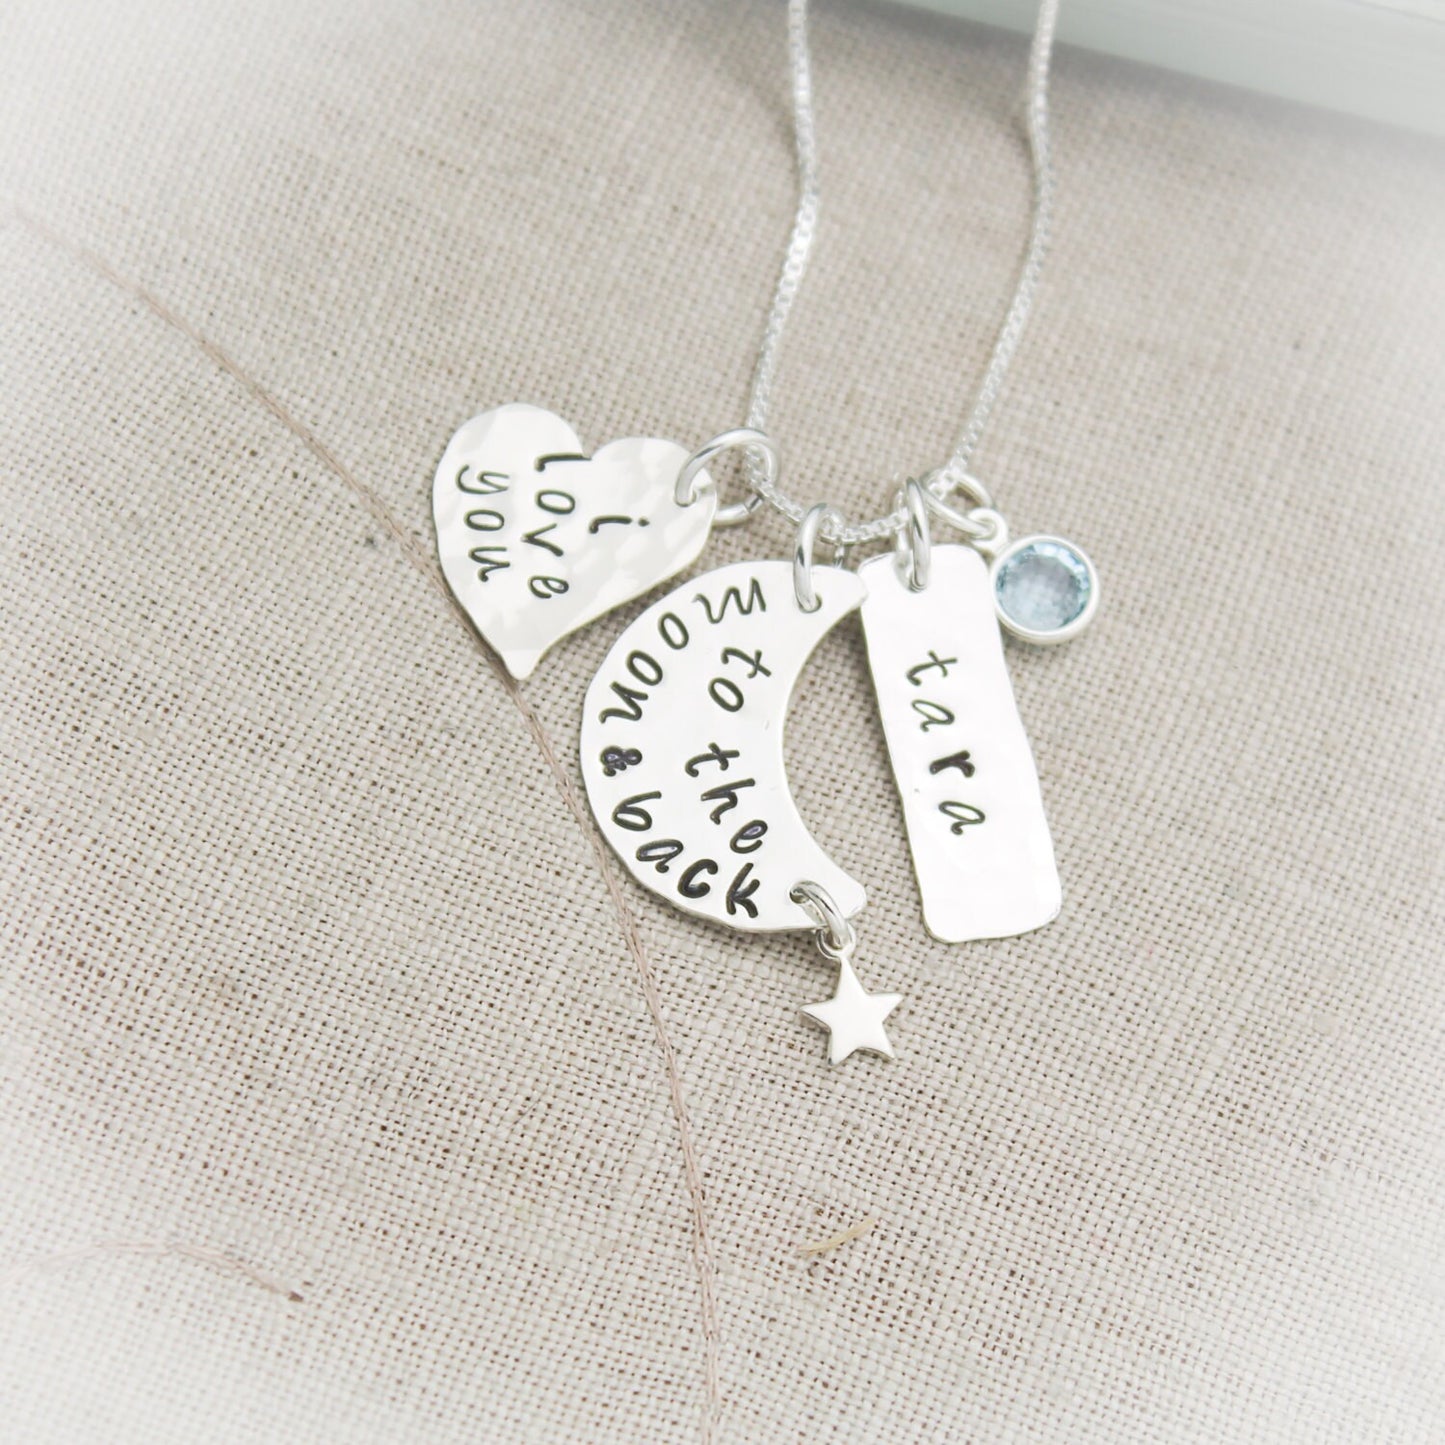 I Love You to the Moon and Back Personalized Necklace in Sterling Silver with Name and Birthstone Hand Stamped Jewelry